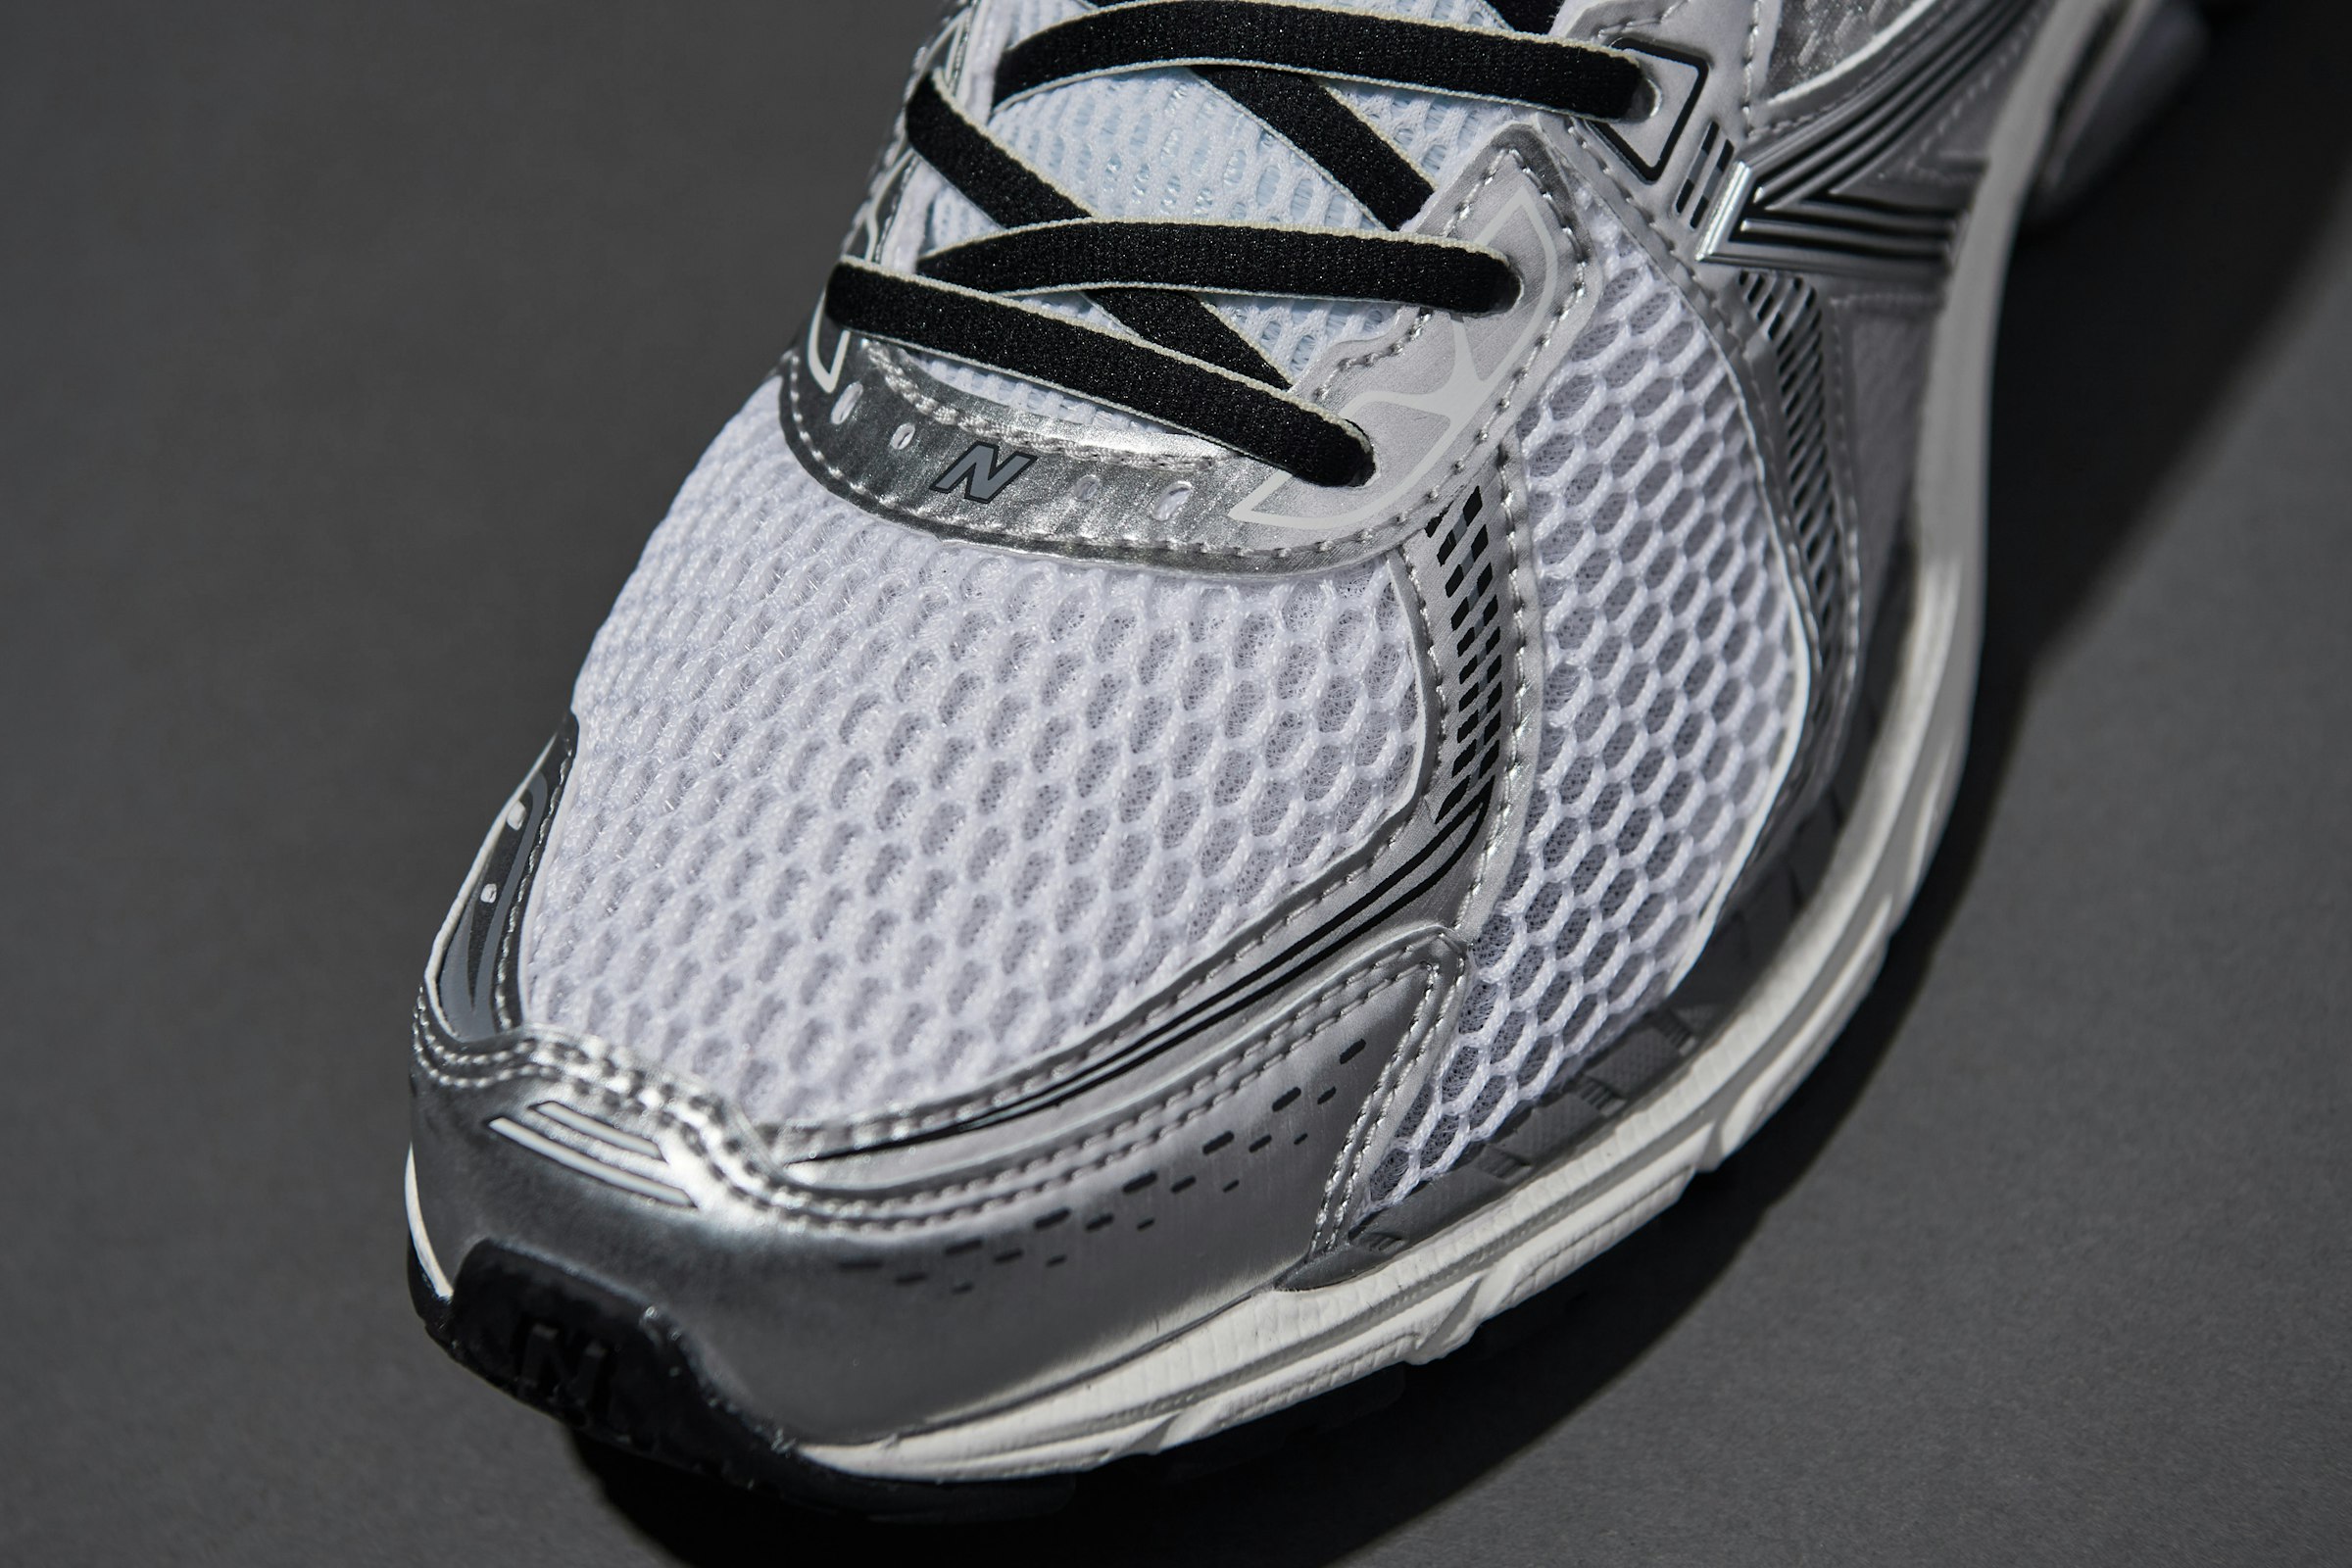 The open mesh upper and silver parts are the details that make these a true representation of 'Dad Shoes'.